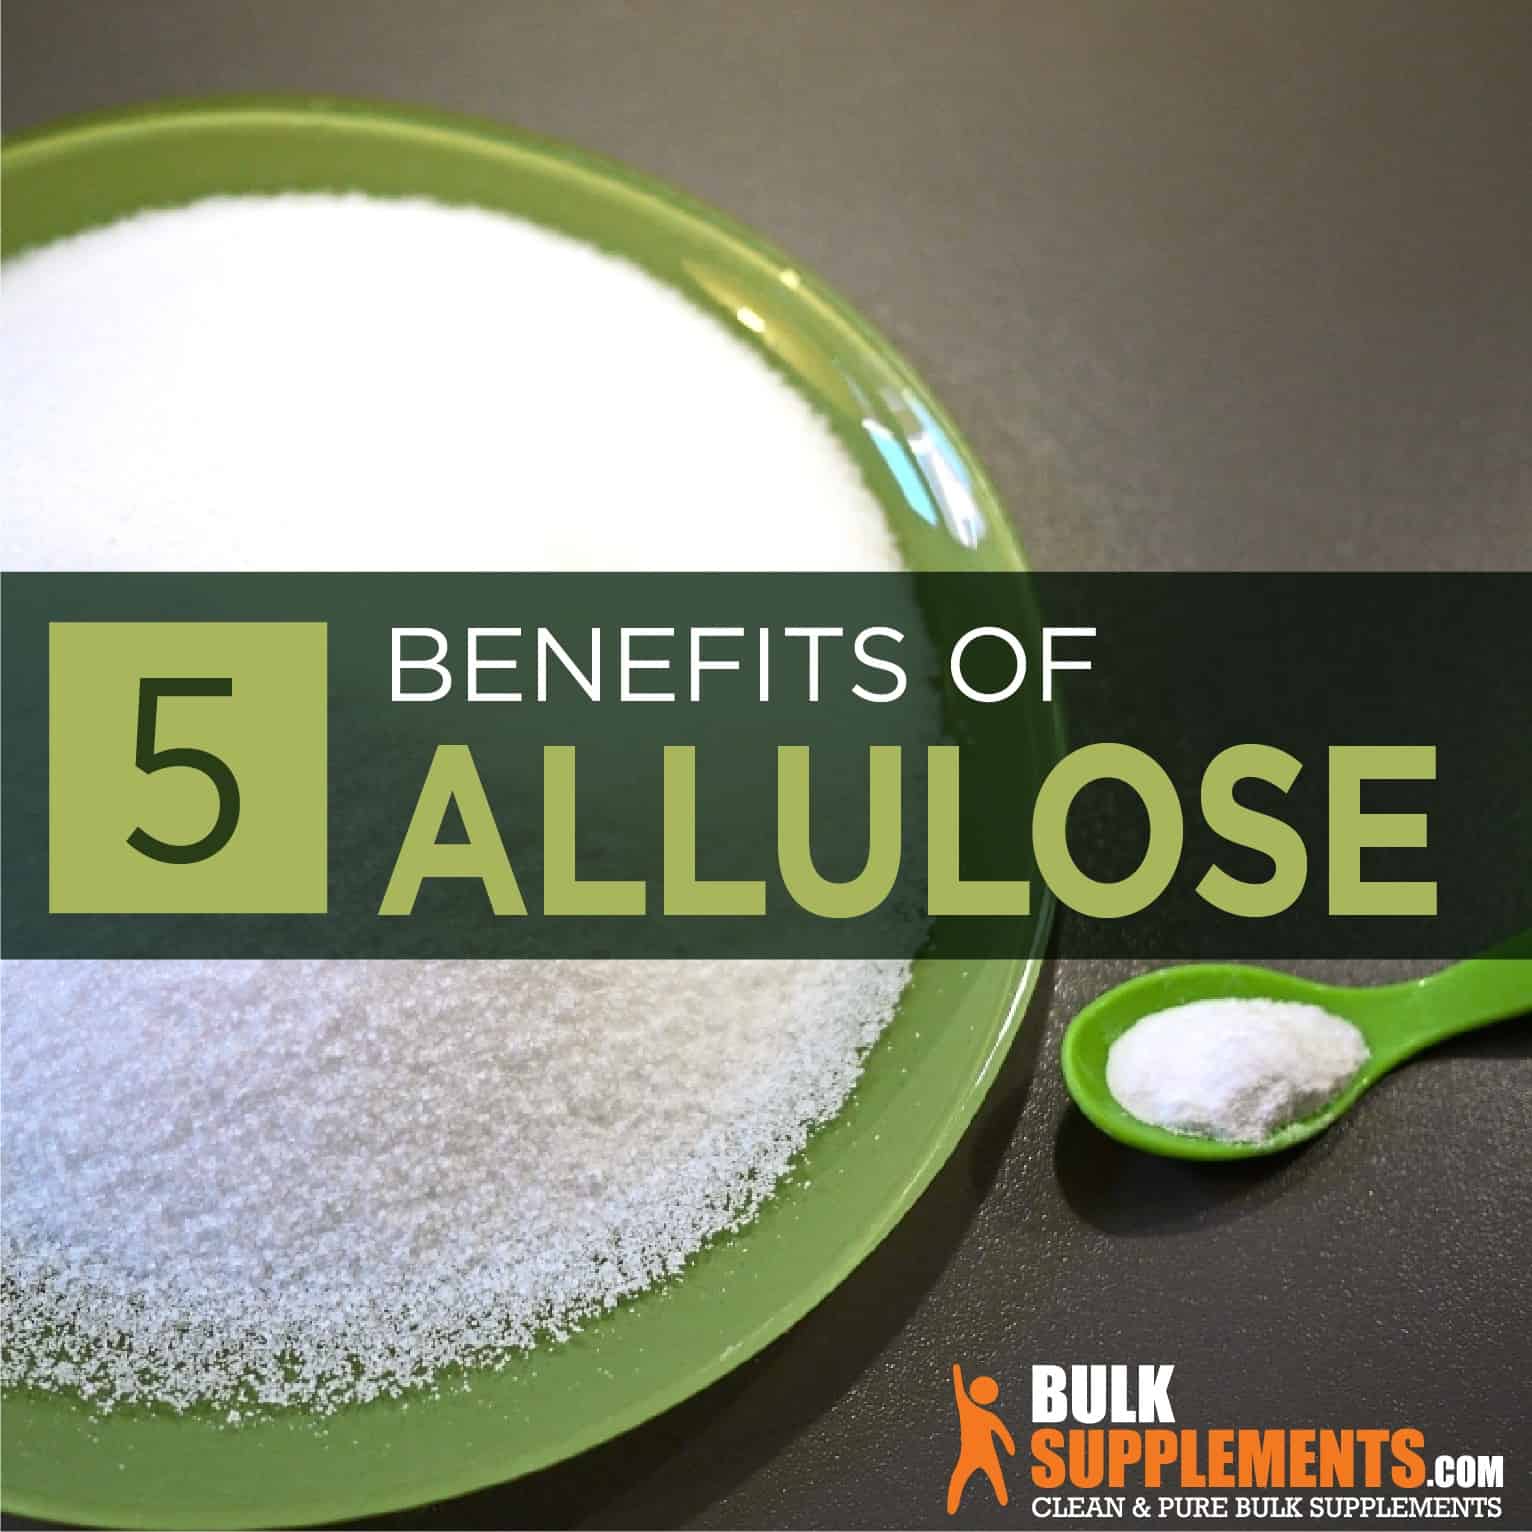 ALLULOSE VS. OTHER SWEETENERS: HOW DOES IT COMPARE?